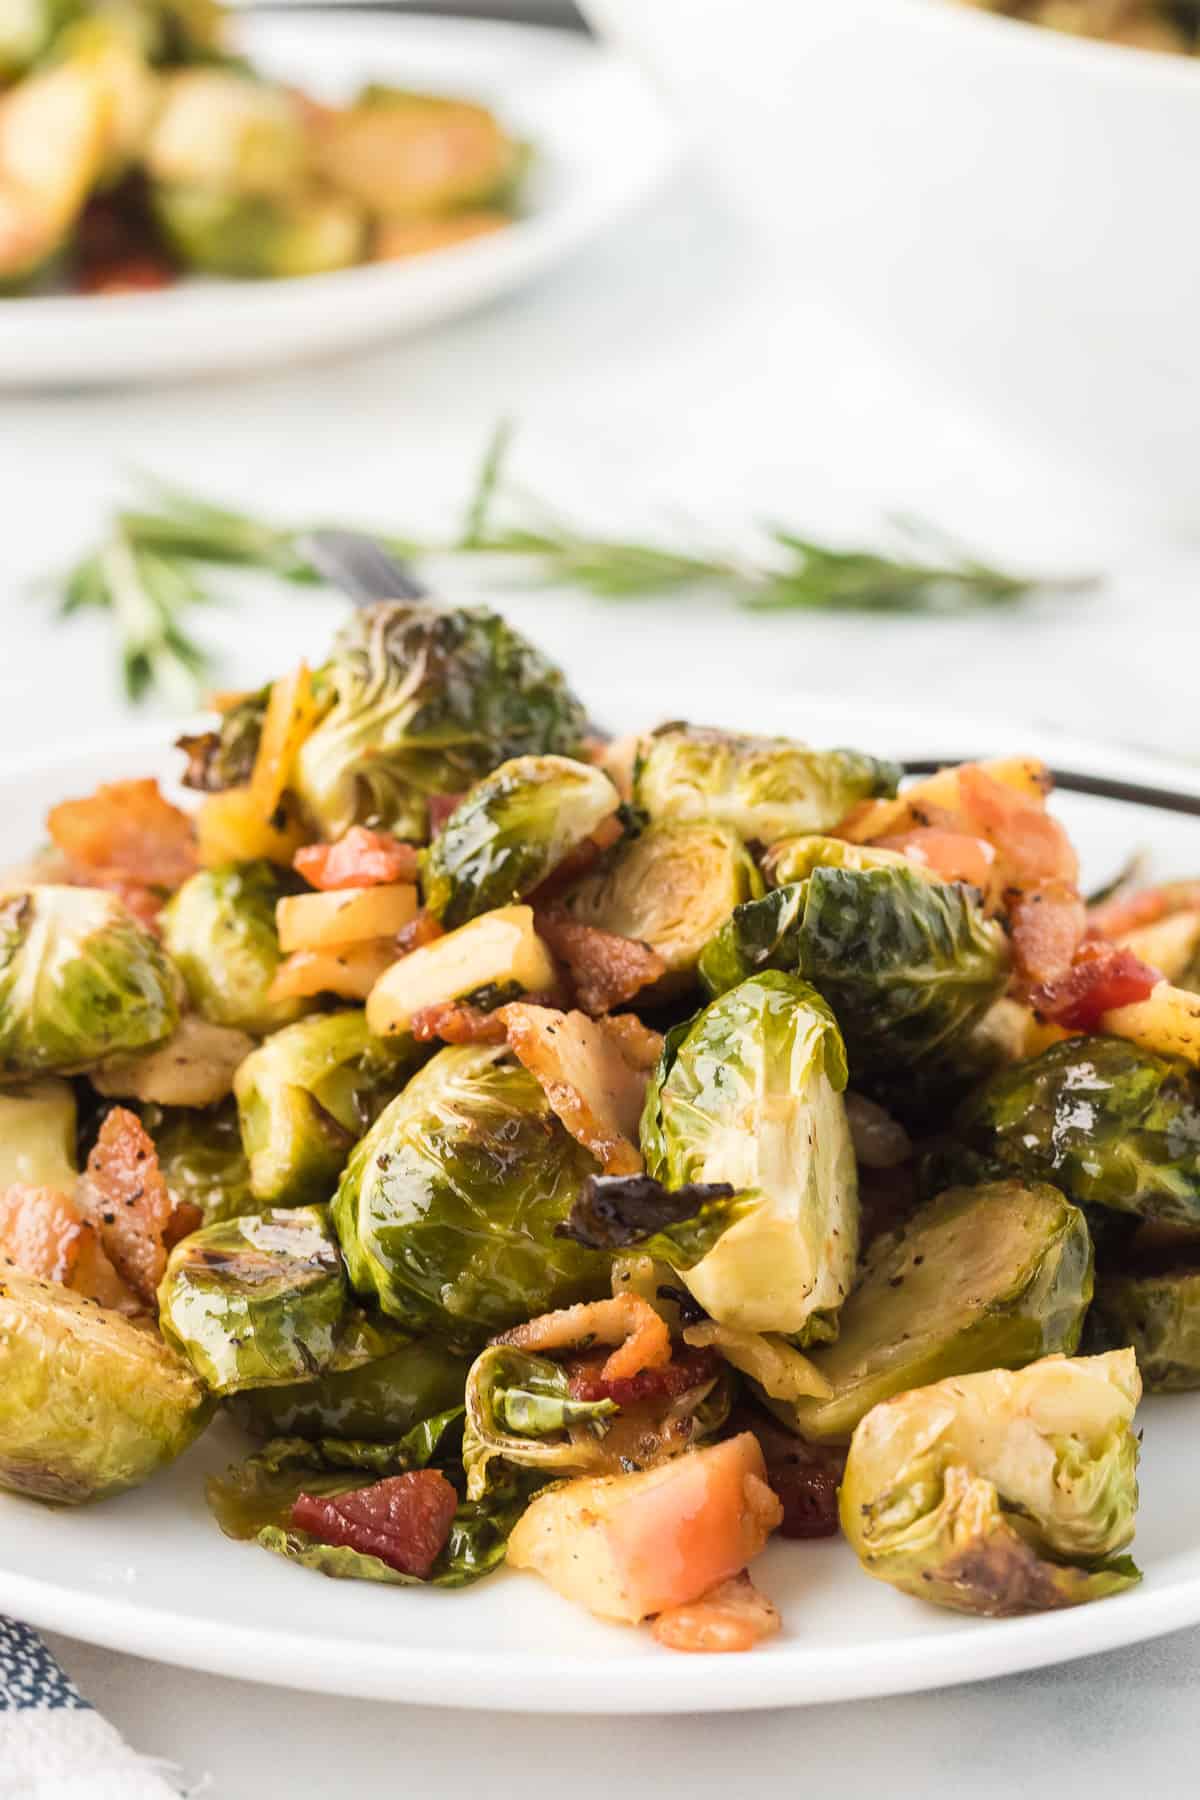 A mound of roasted brussels sprouts with bacon and apples o n a white plate with rosemary in the background.